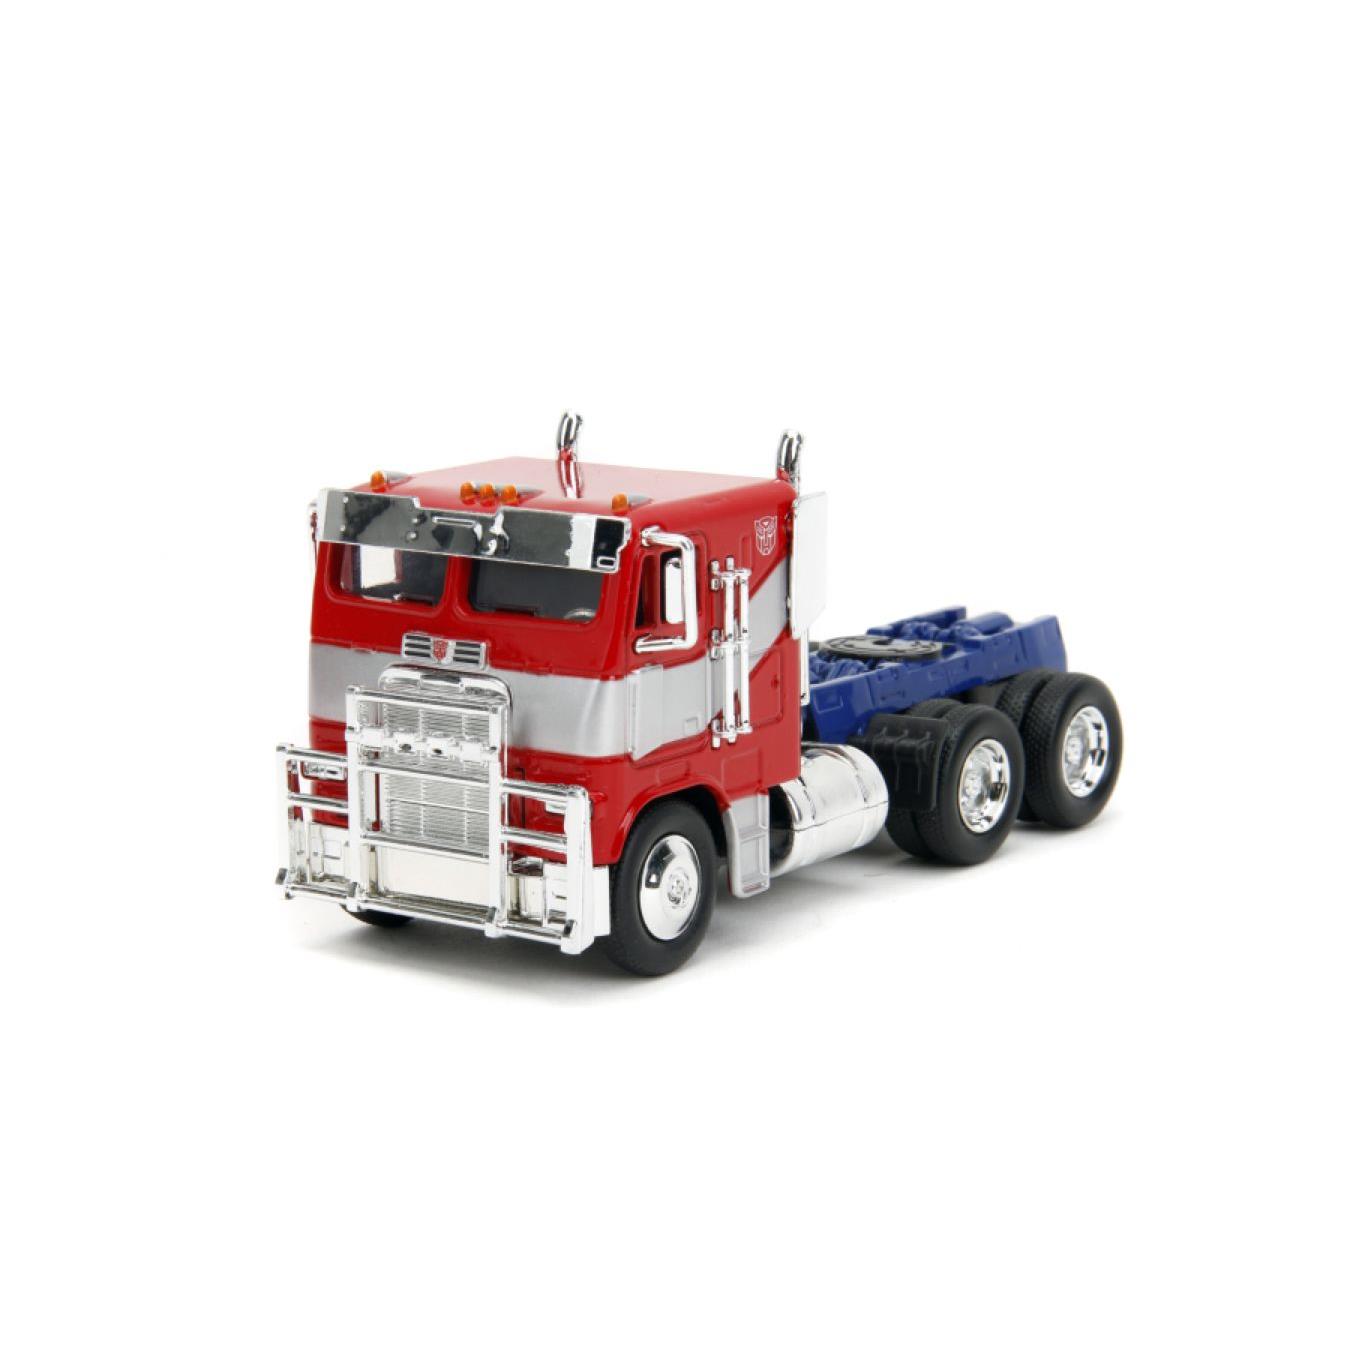 transformers: rise of the beasts - optimus prime 1:32 scale vehicle